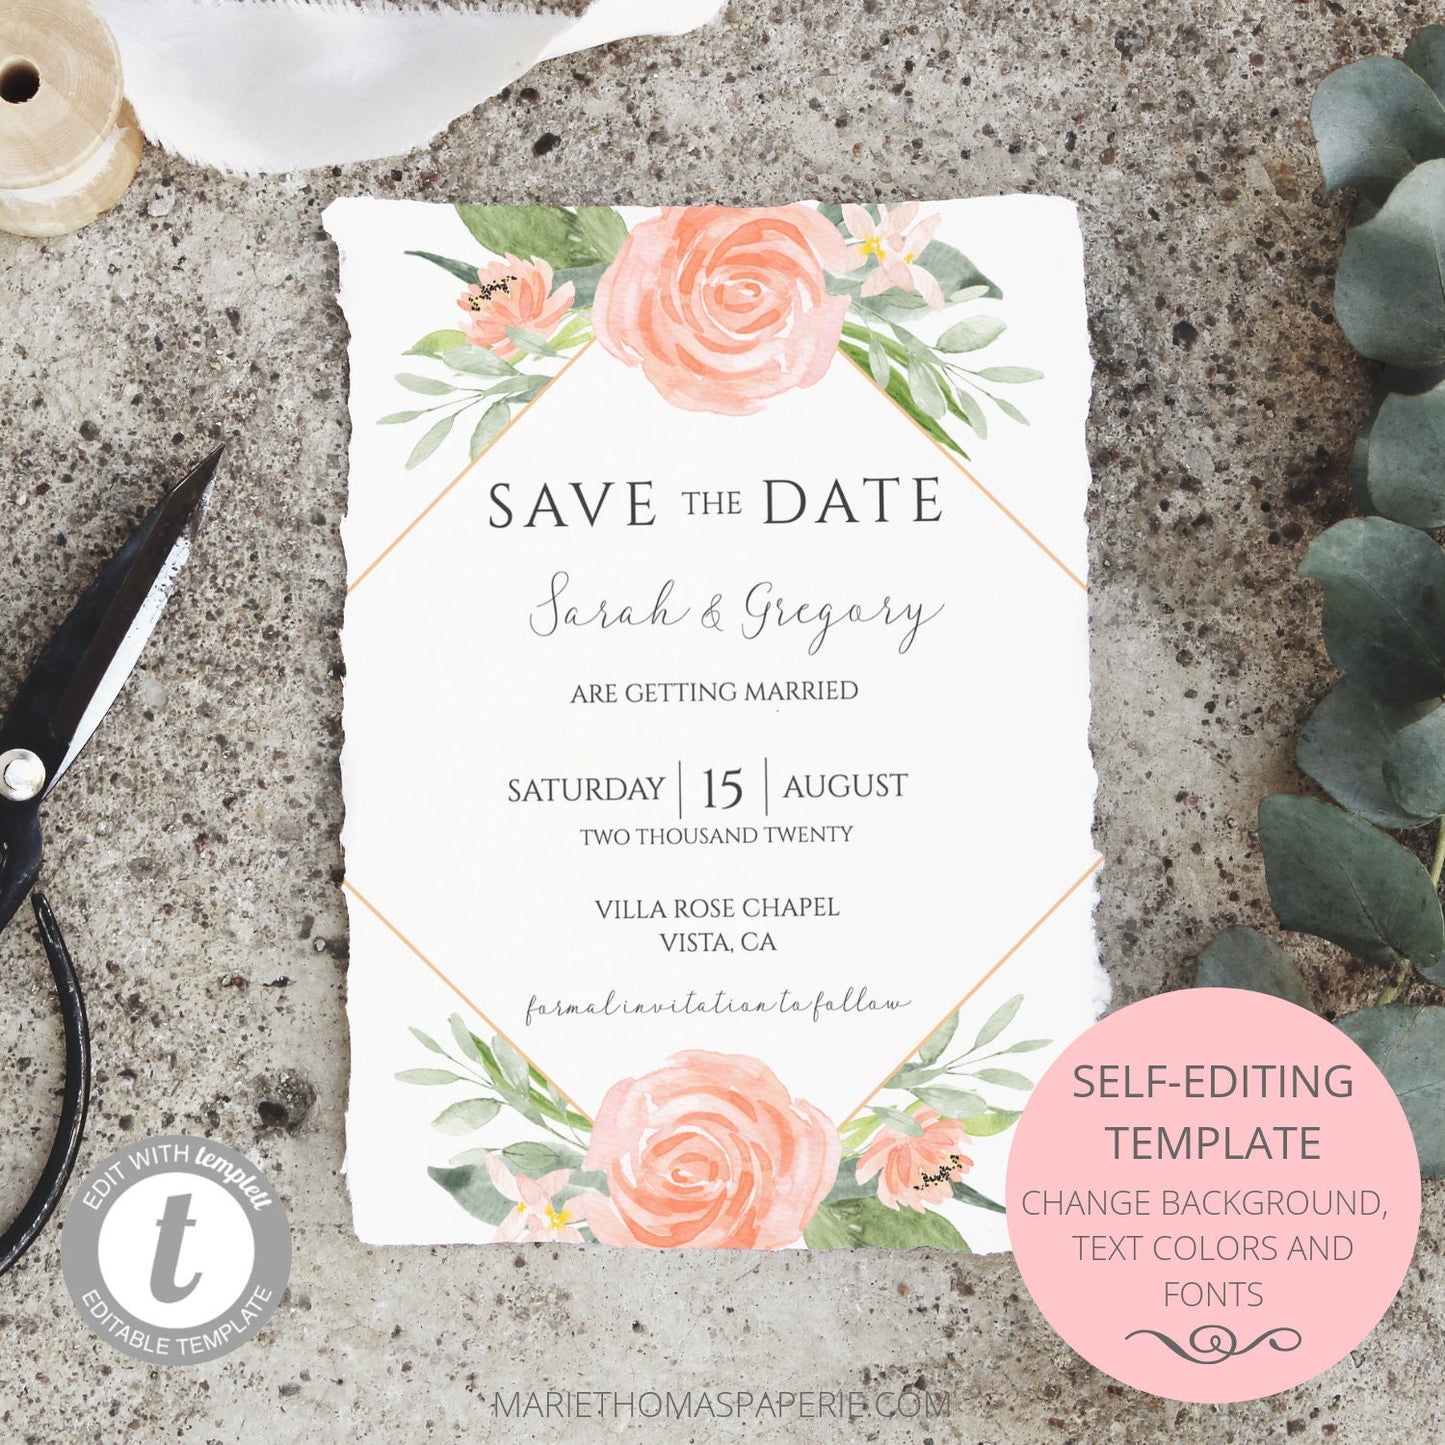 Editable Save the Date Boho Peach Floral Save the Date Cards Wedding Announcement Text Template